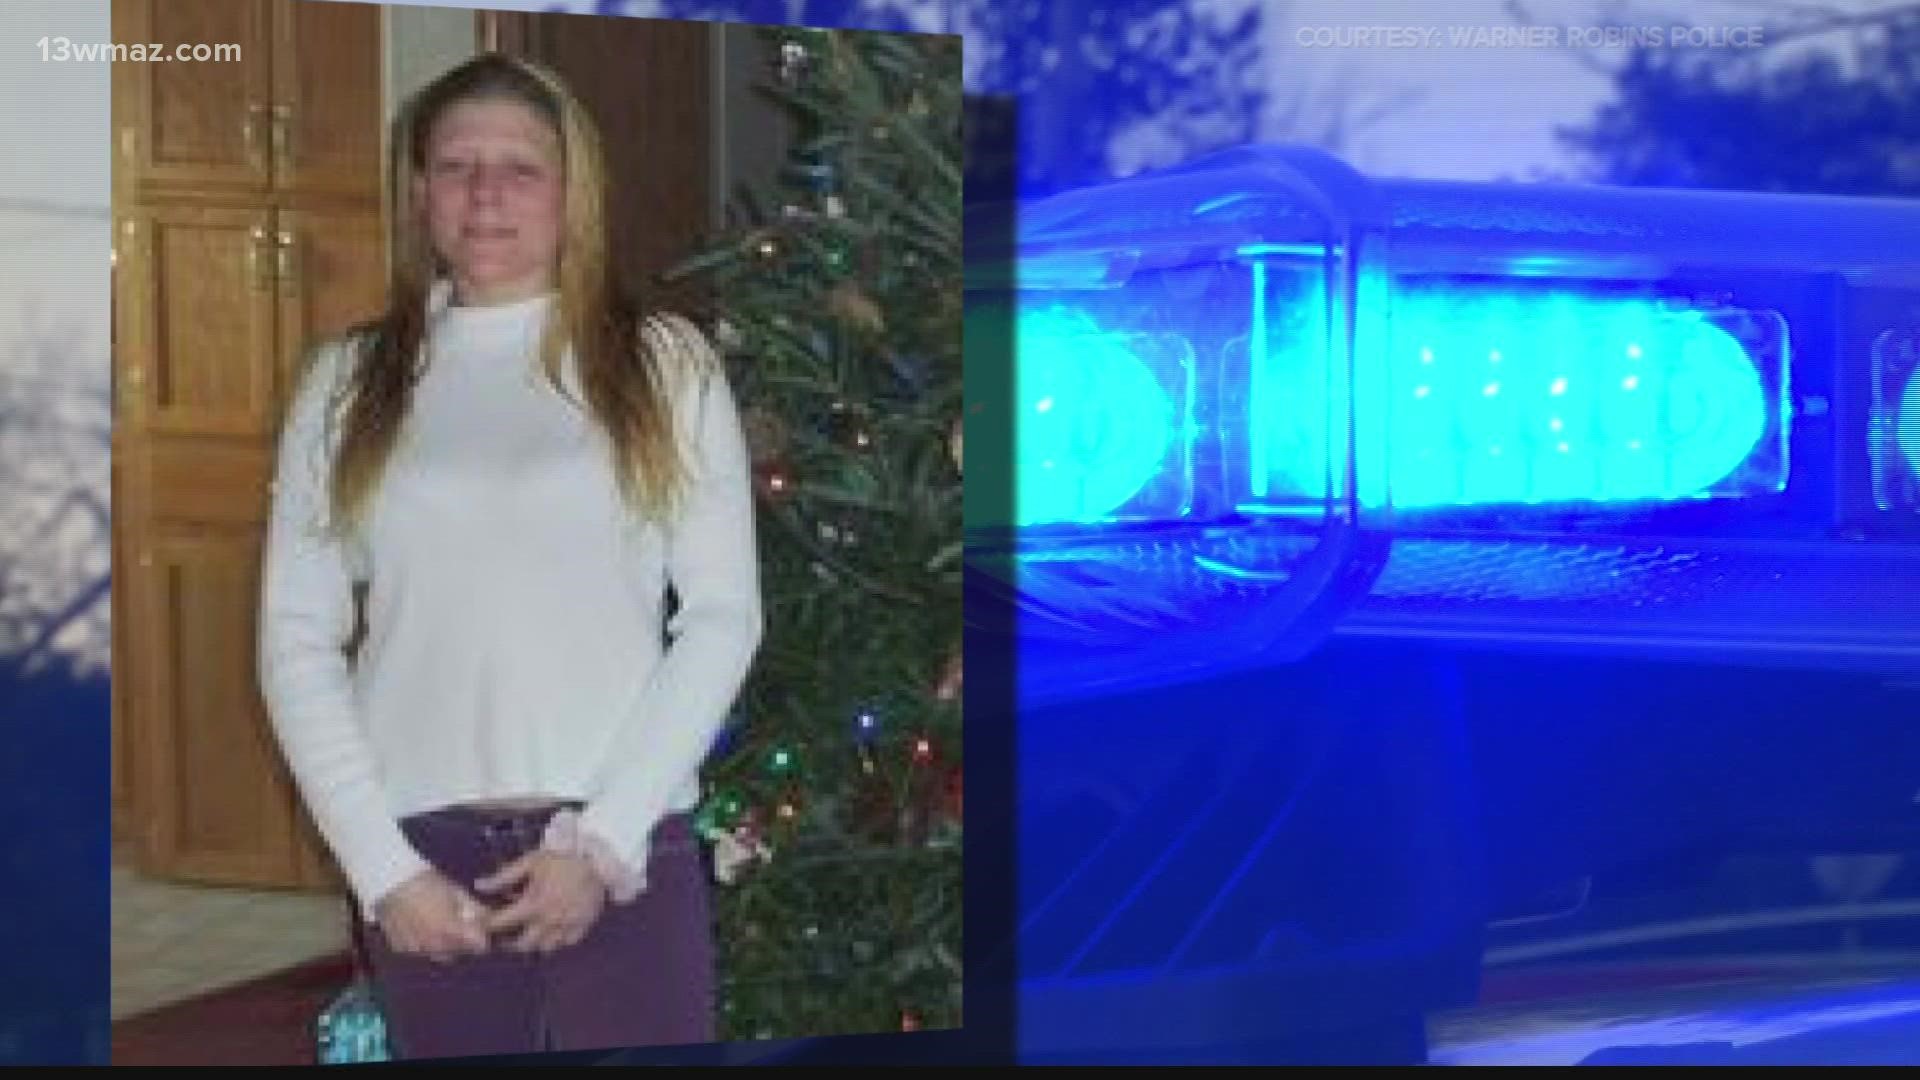 13WMAZ spoke with Bergner's mom and friend, and the lead detective on the case to find out more.